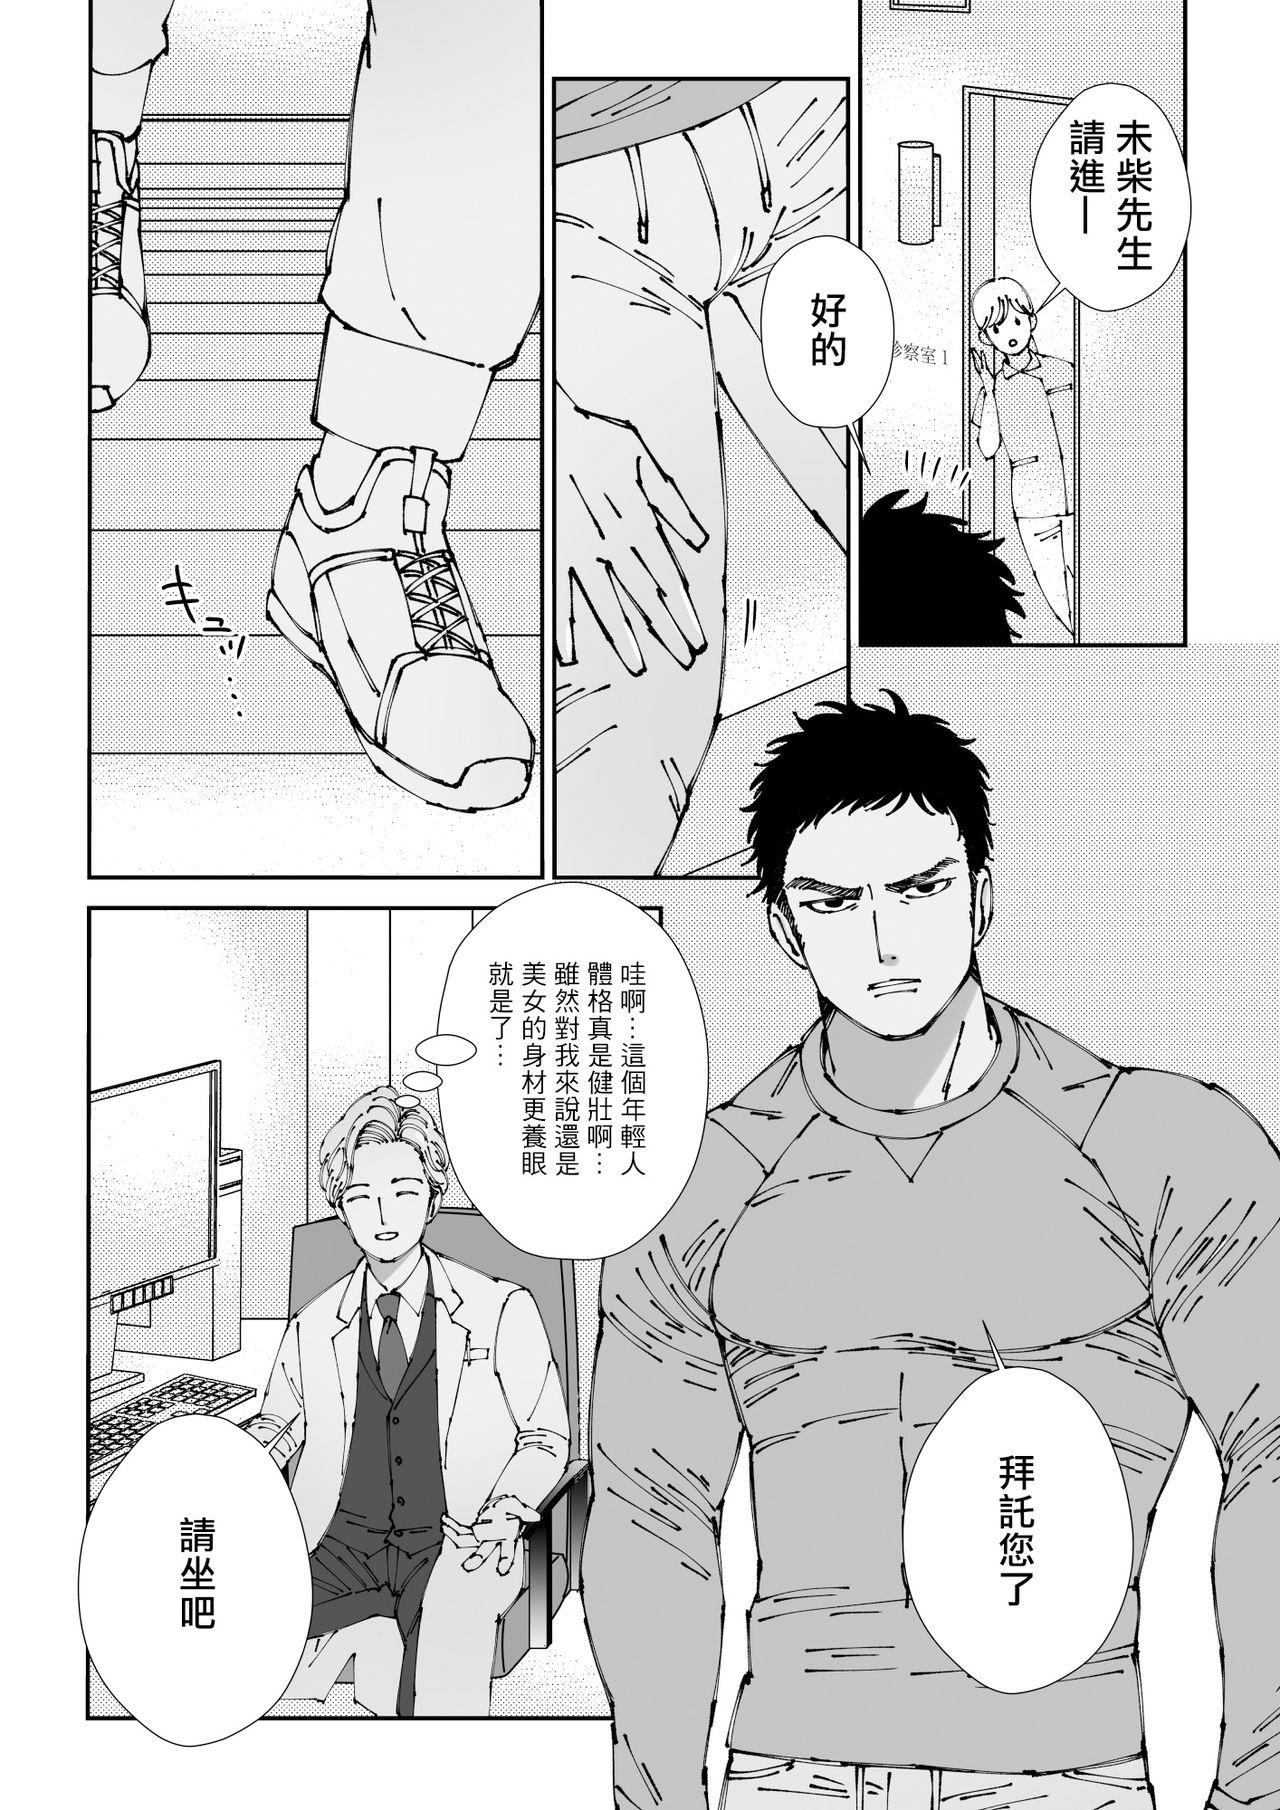 Gay Outinpublic 触摸 勃起、凹陷乳头。 01 Chinese Gay Theresome - Page 4